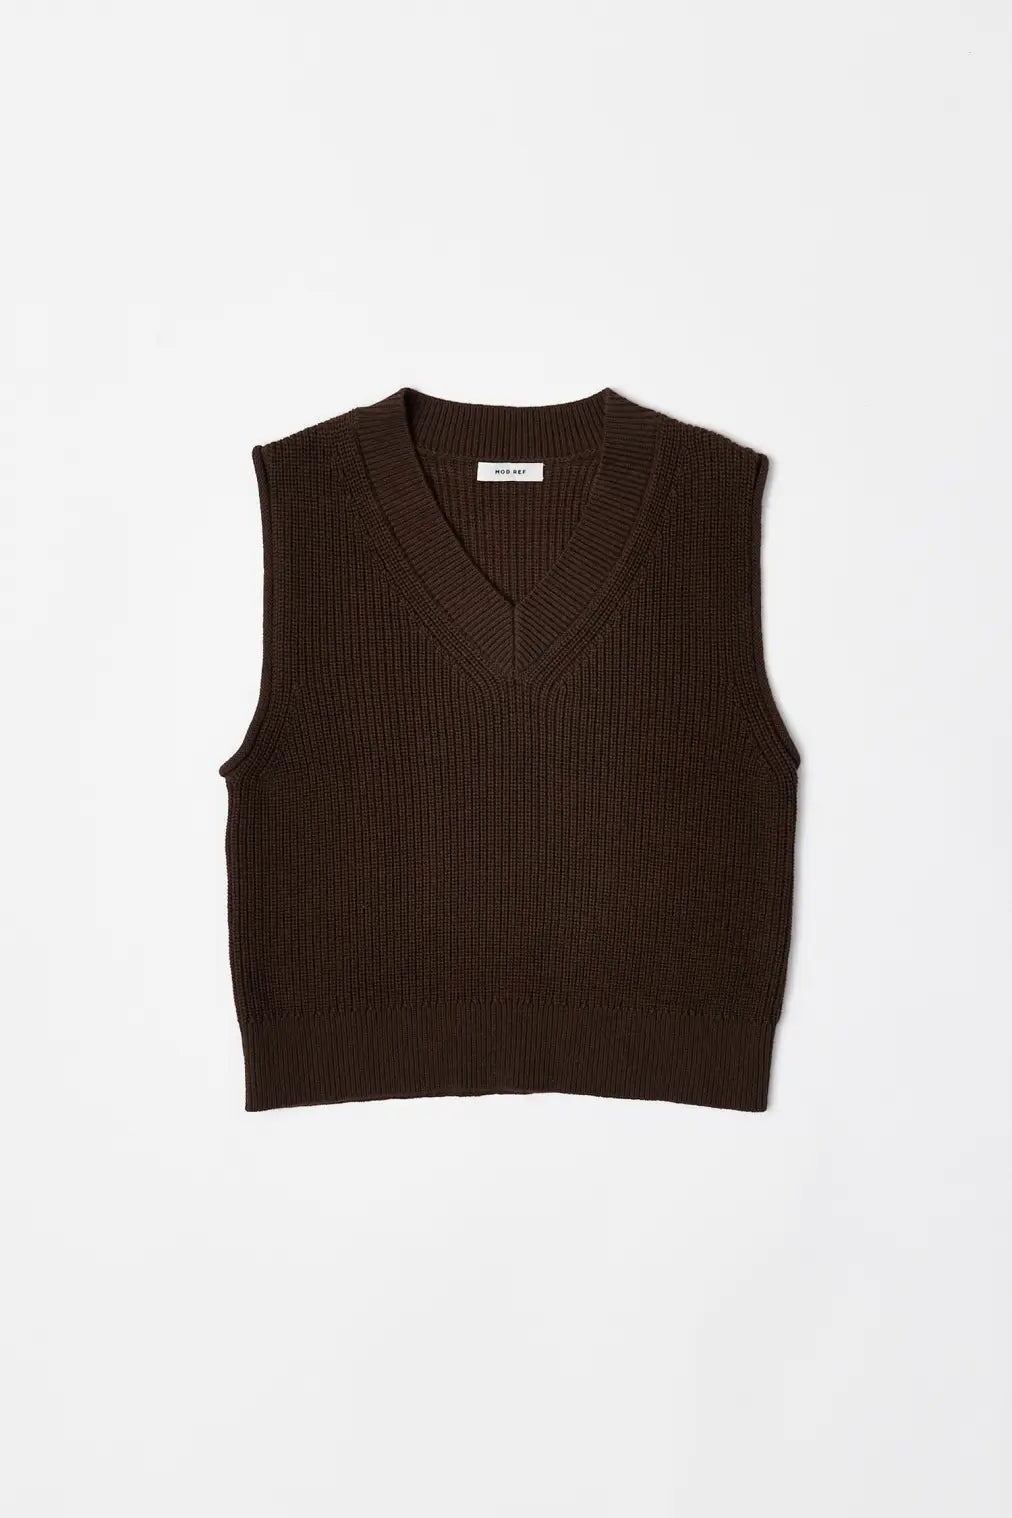 The Aster Vest